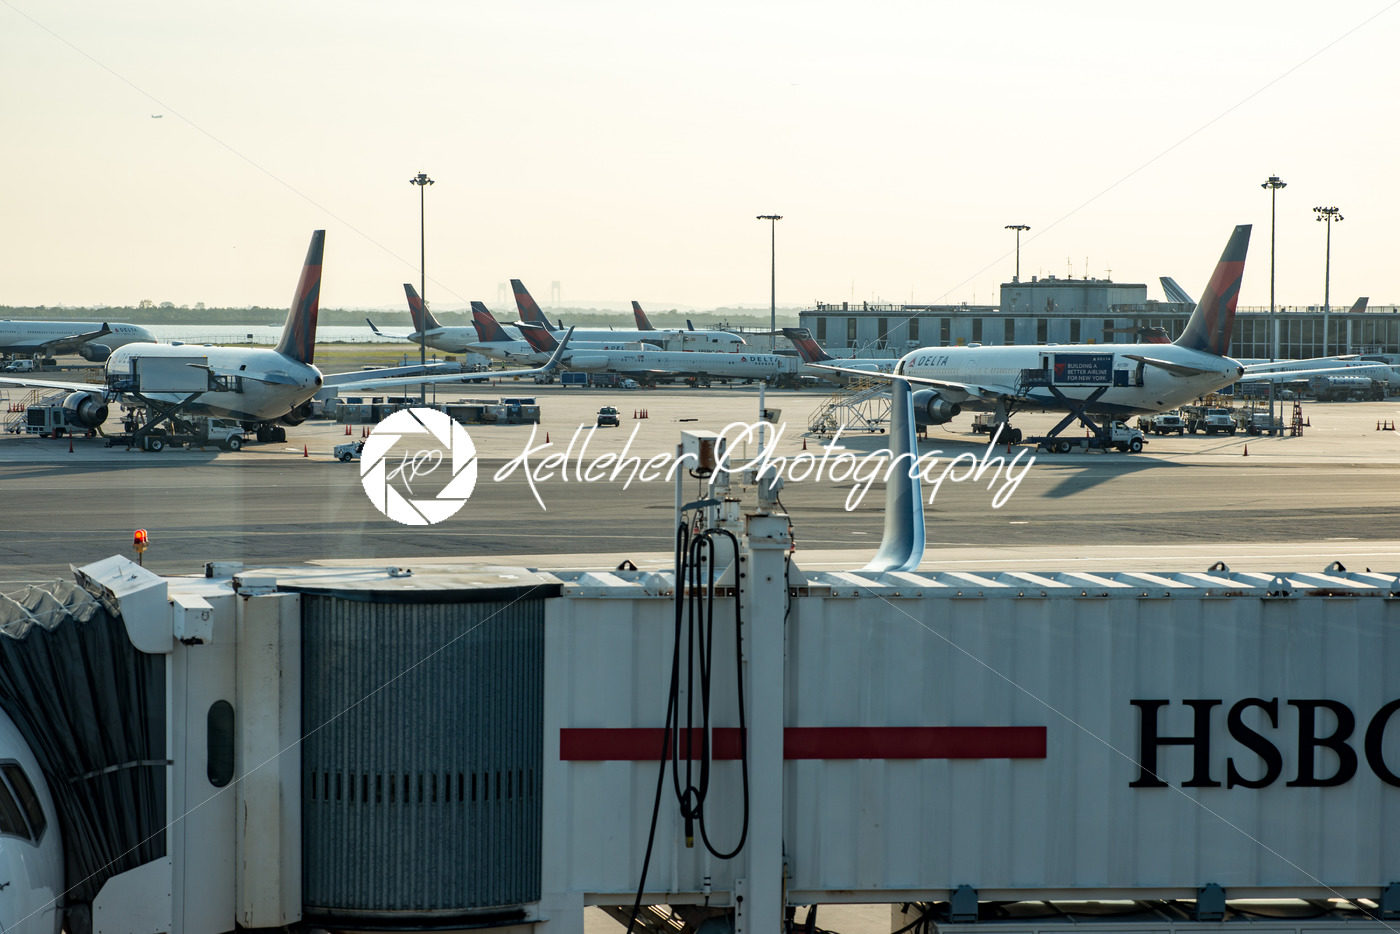 NEW YORK – AUGUST 17, 2017: Delta Airlines plane on tarmac at Terminal 4 at JFK International Airport - Kelleher Photography Store